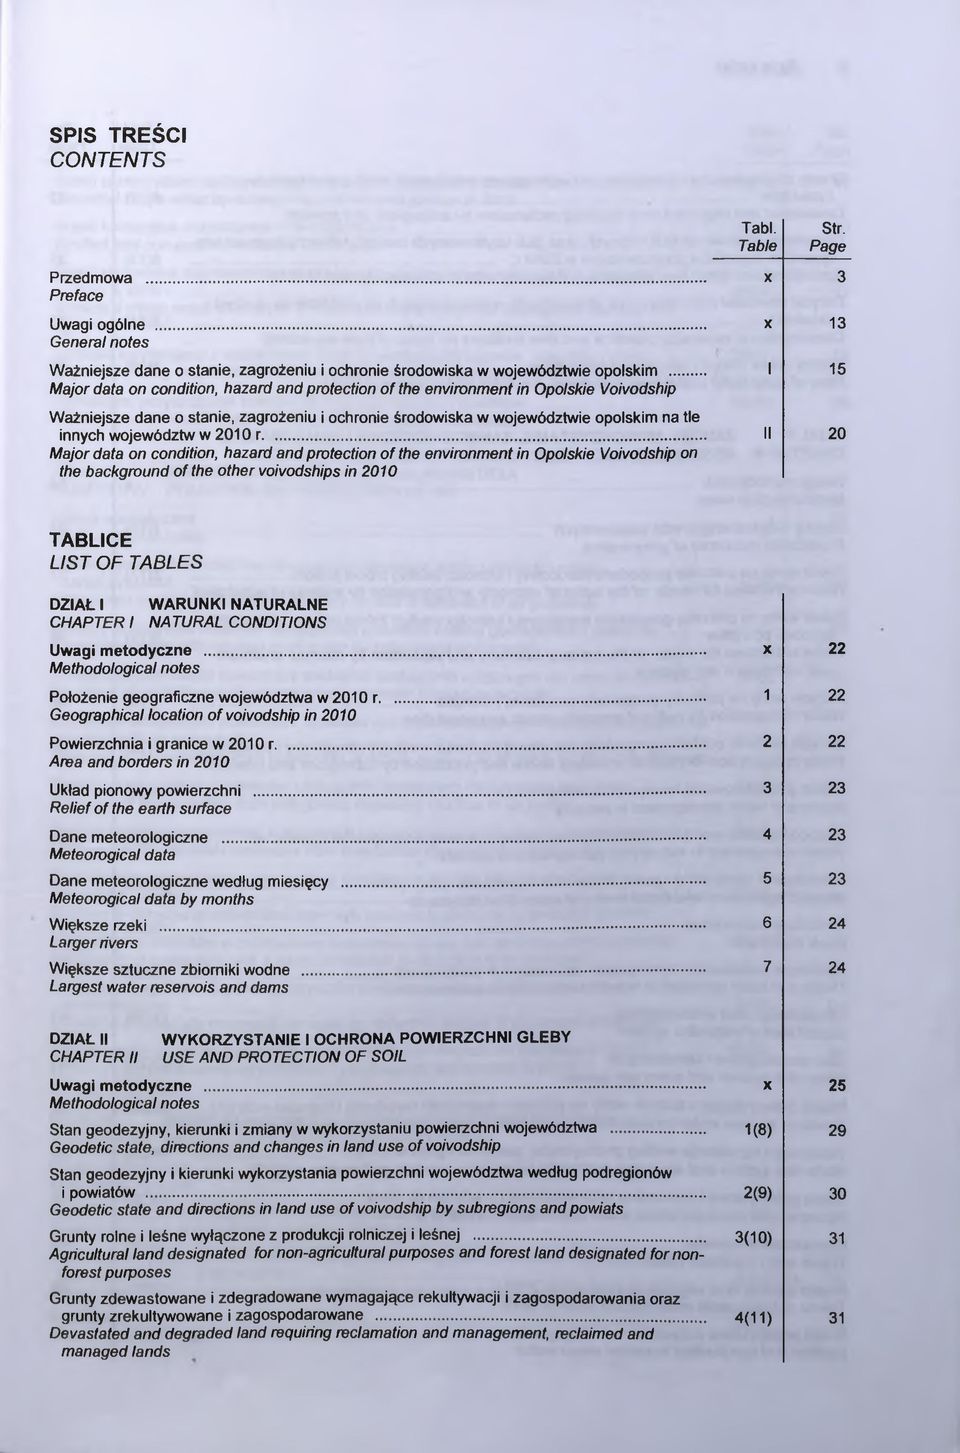 województw w 201 Or... Major data on condition, hazard and protection o f the environment in Opolskie Voivodship on the background o f the other voivodships in 2010 Tabl. Table x x I II Str.